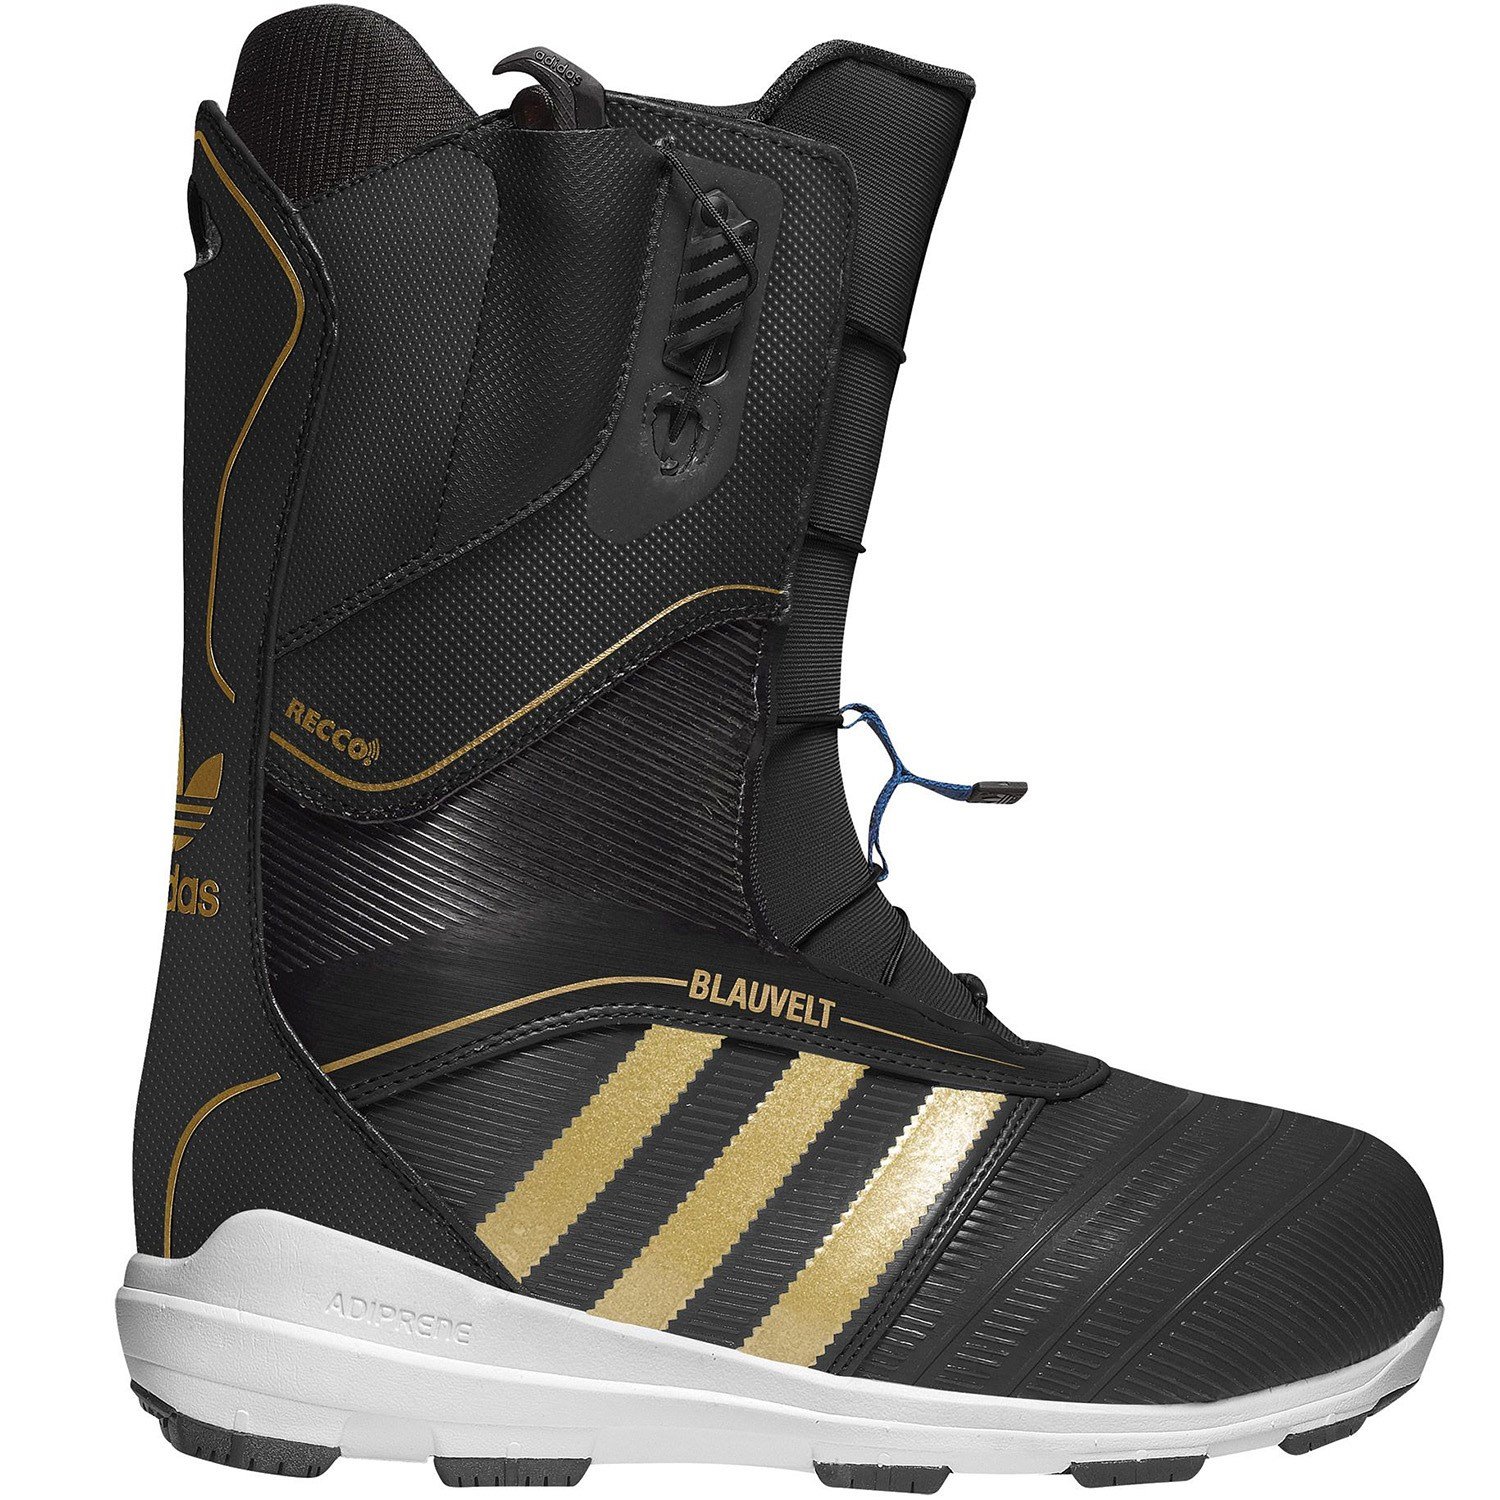 adidas snowboard boots review